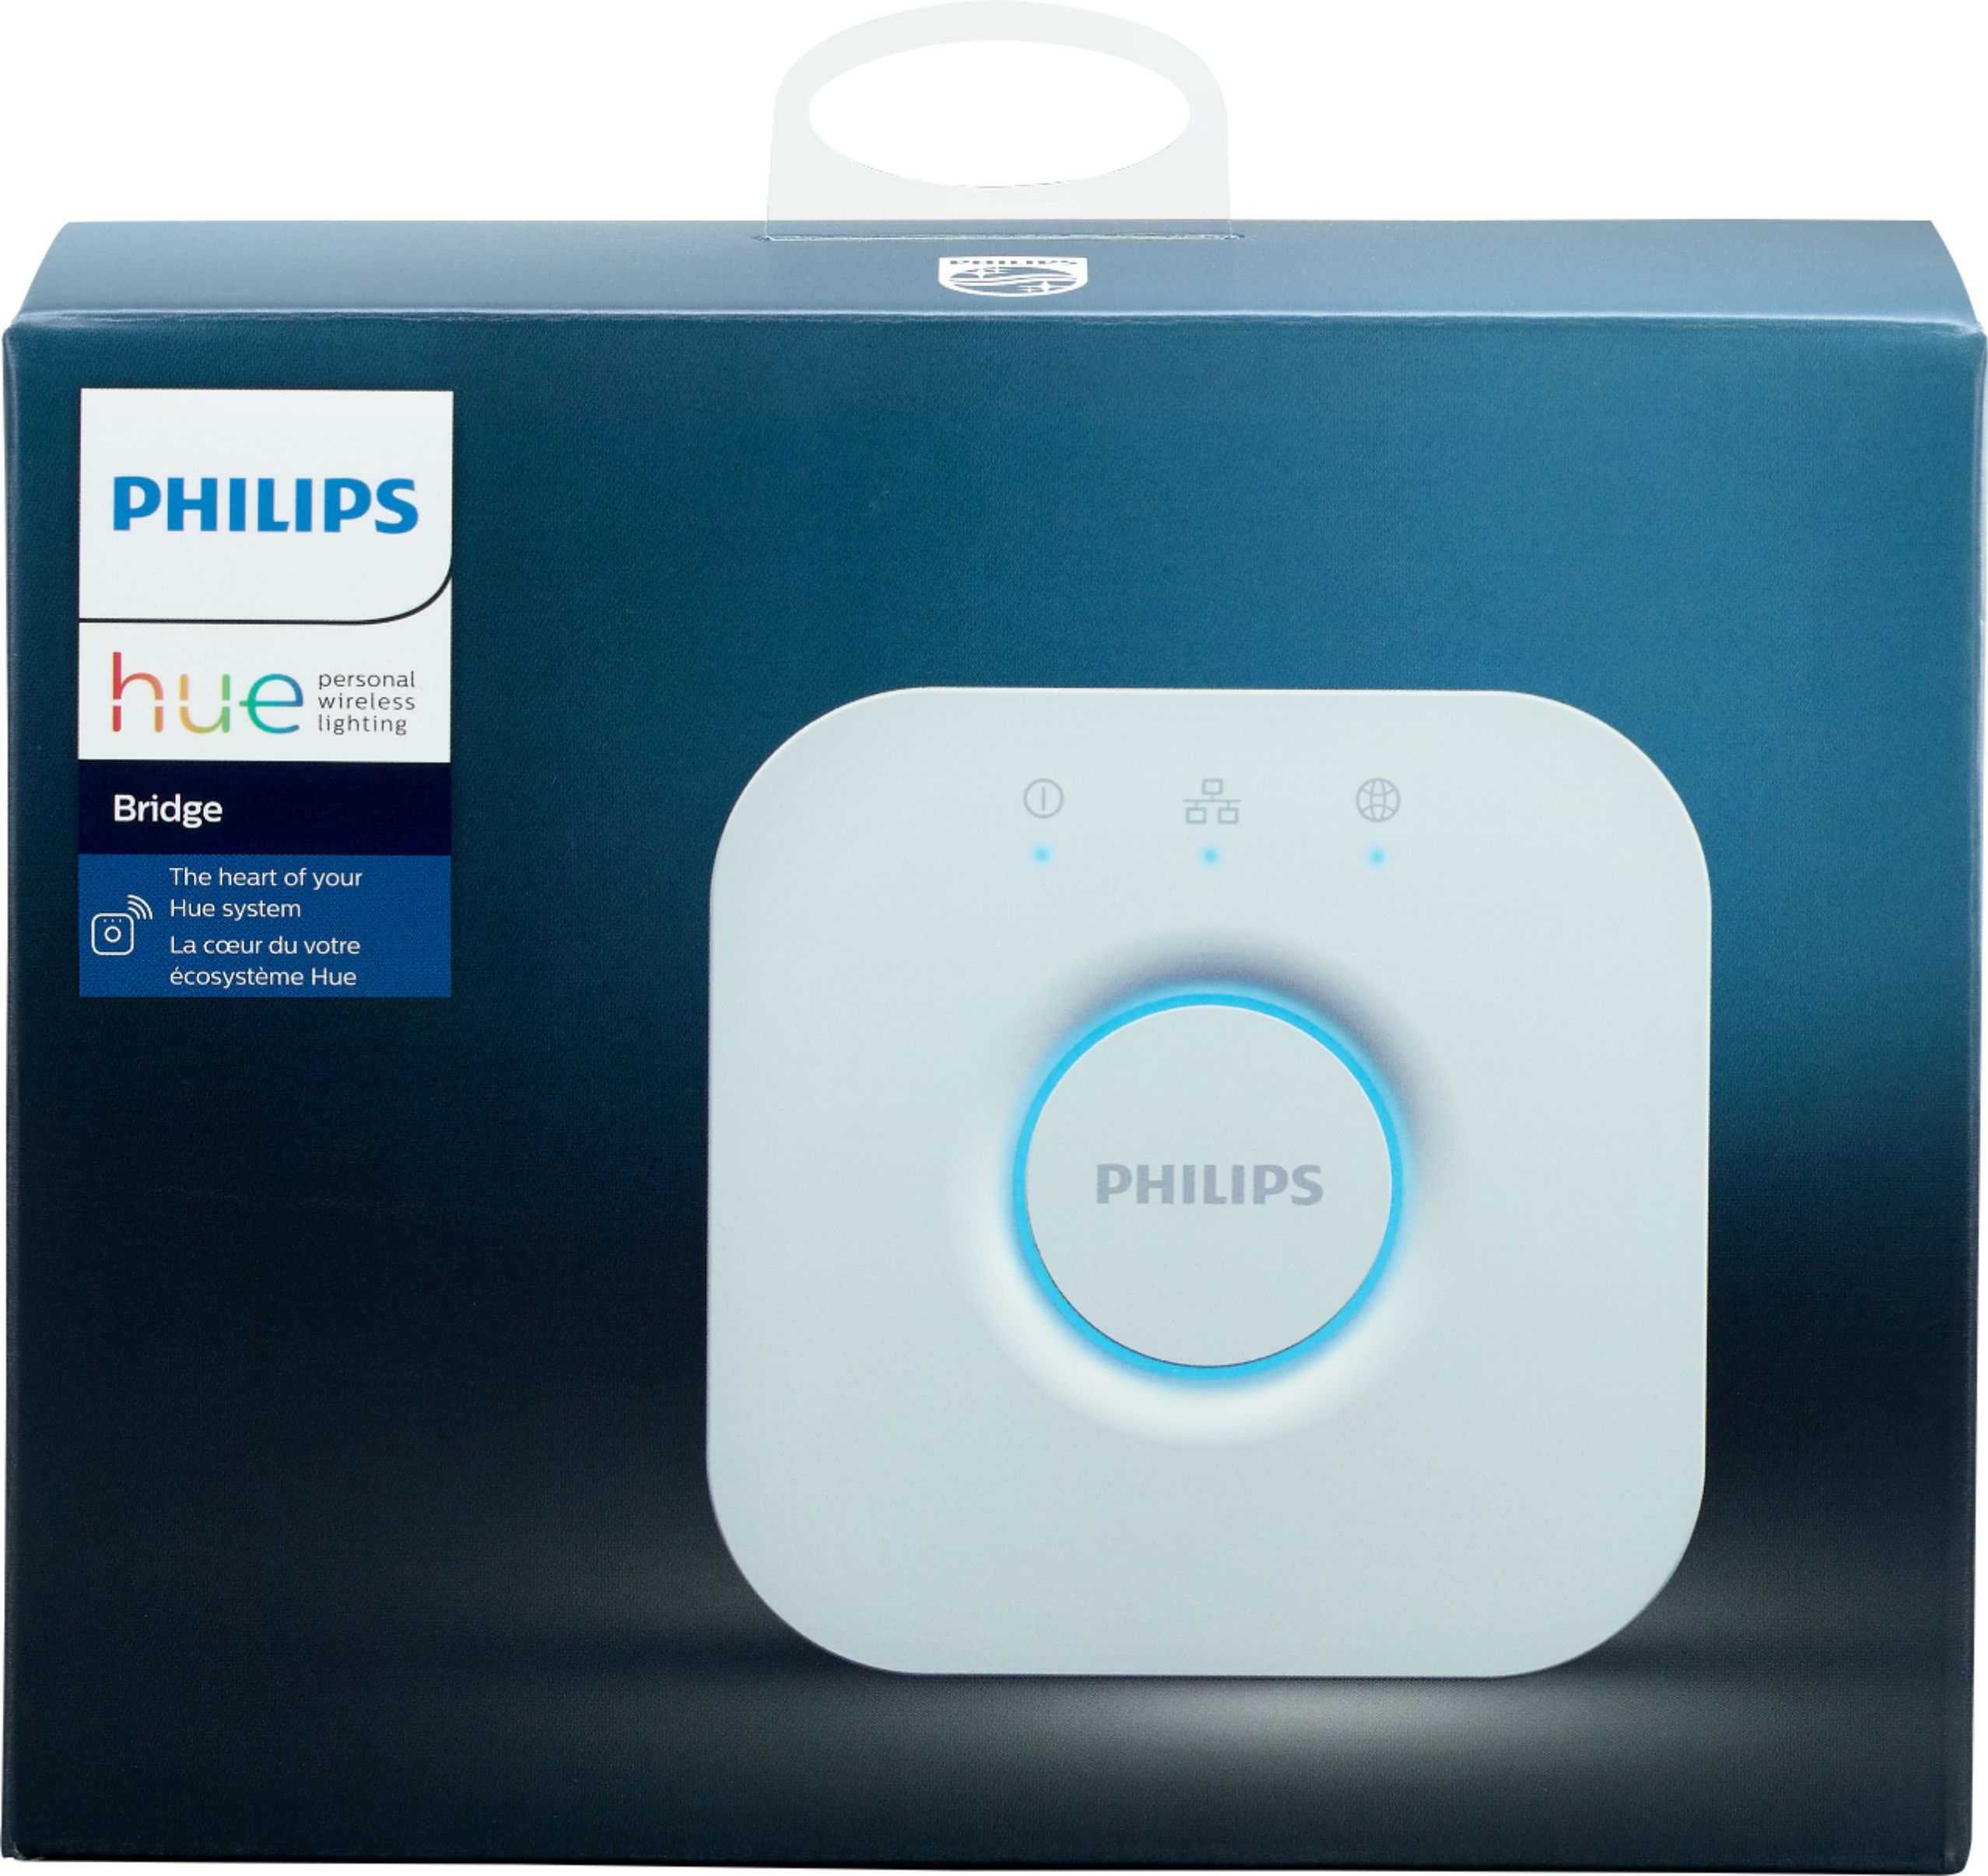 Philips Hue is killing off support for the original Hue Bridge - CNET